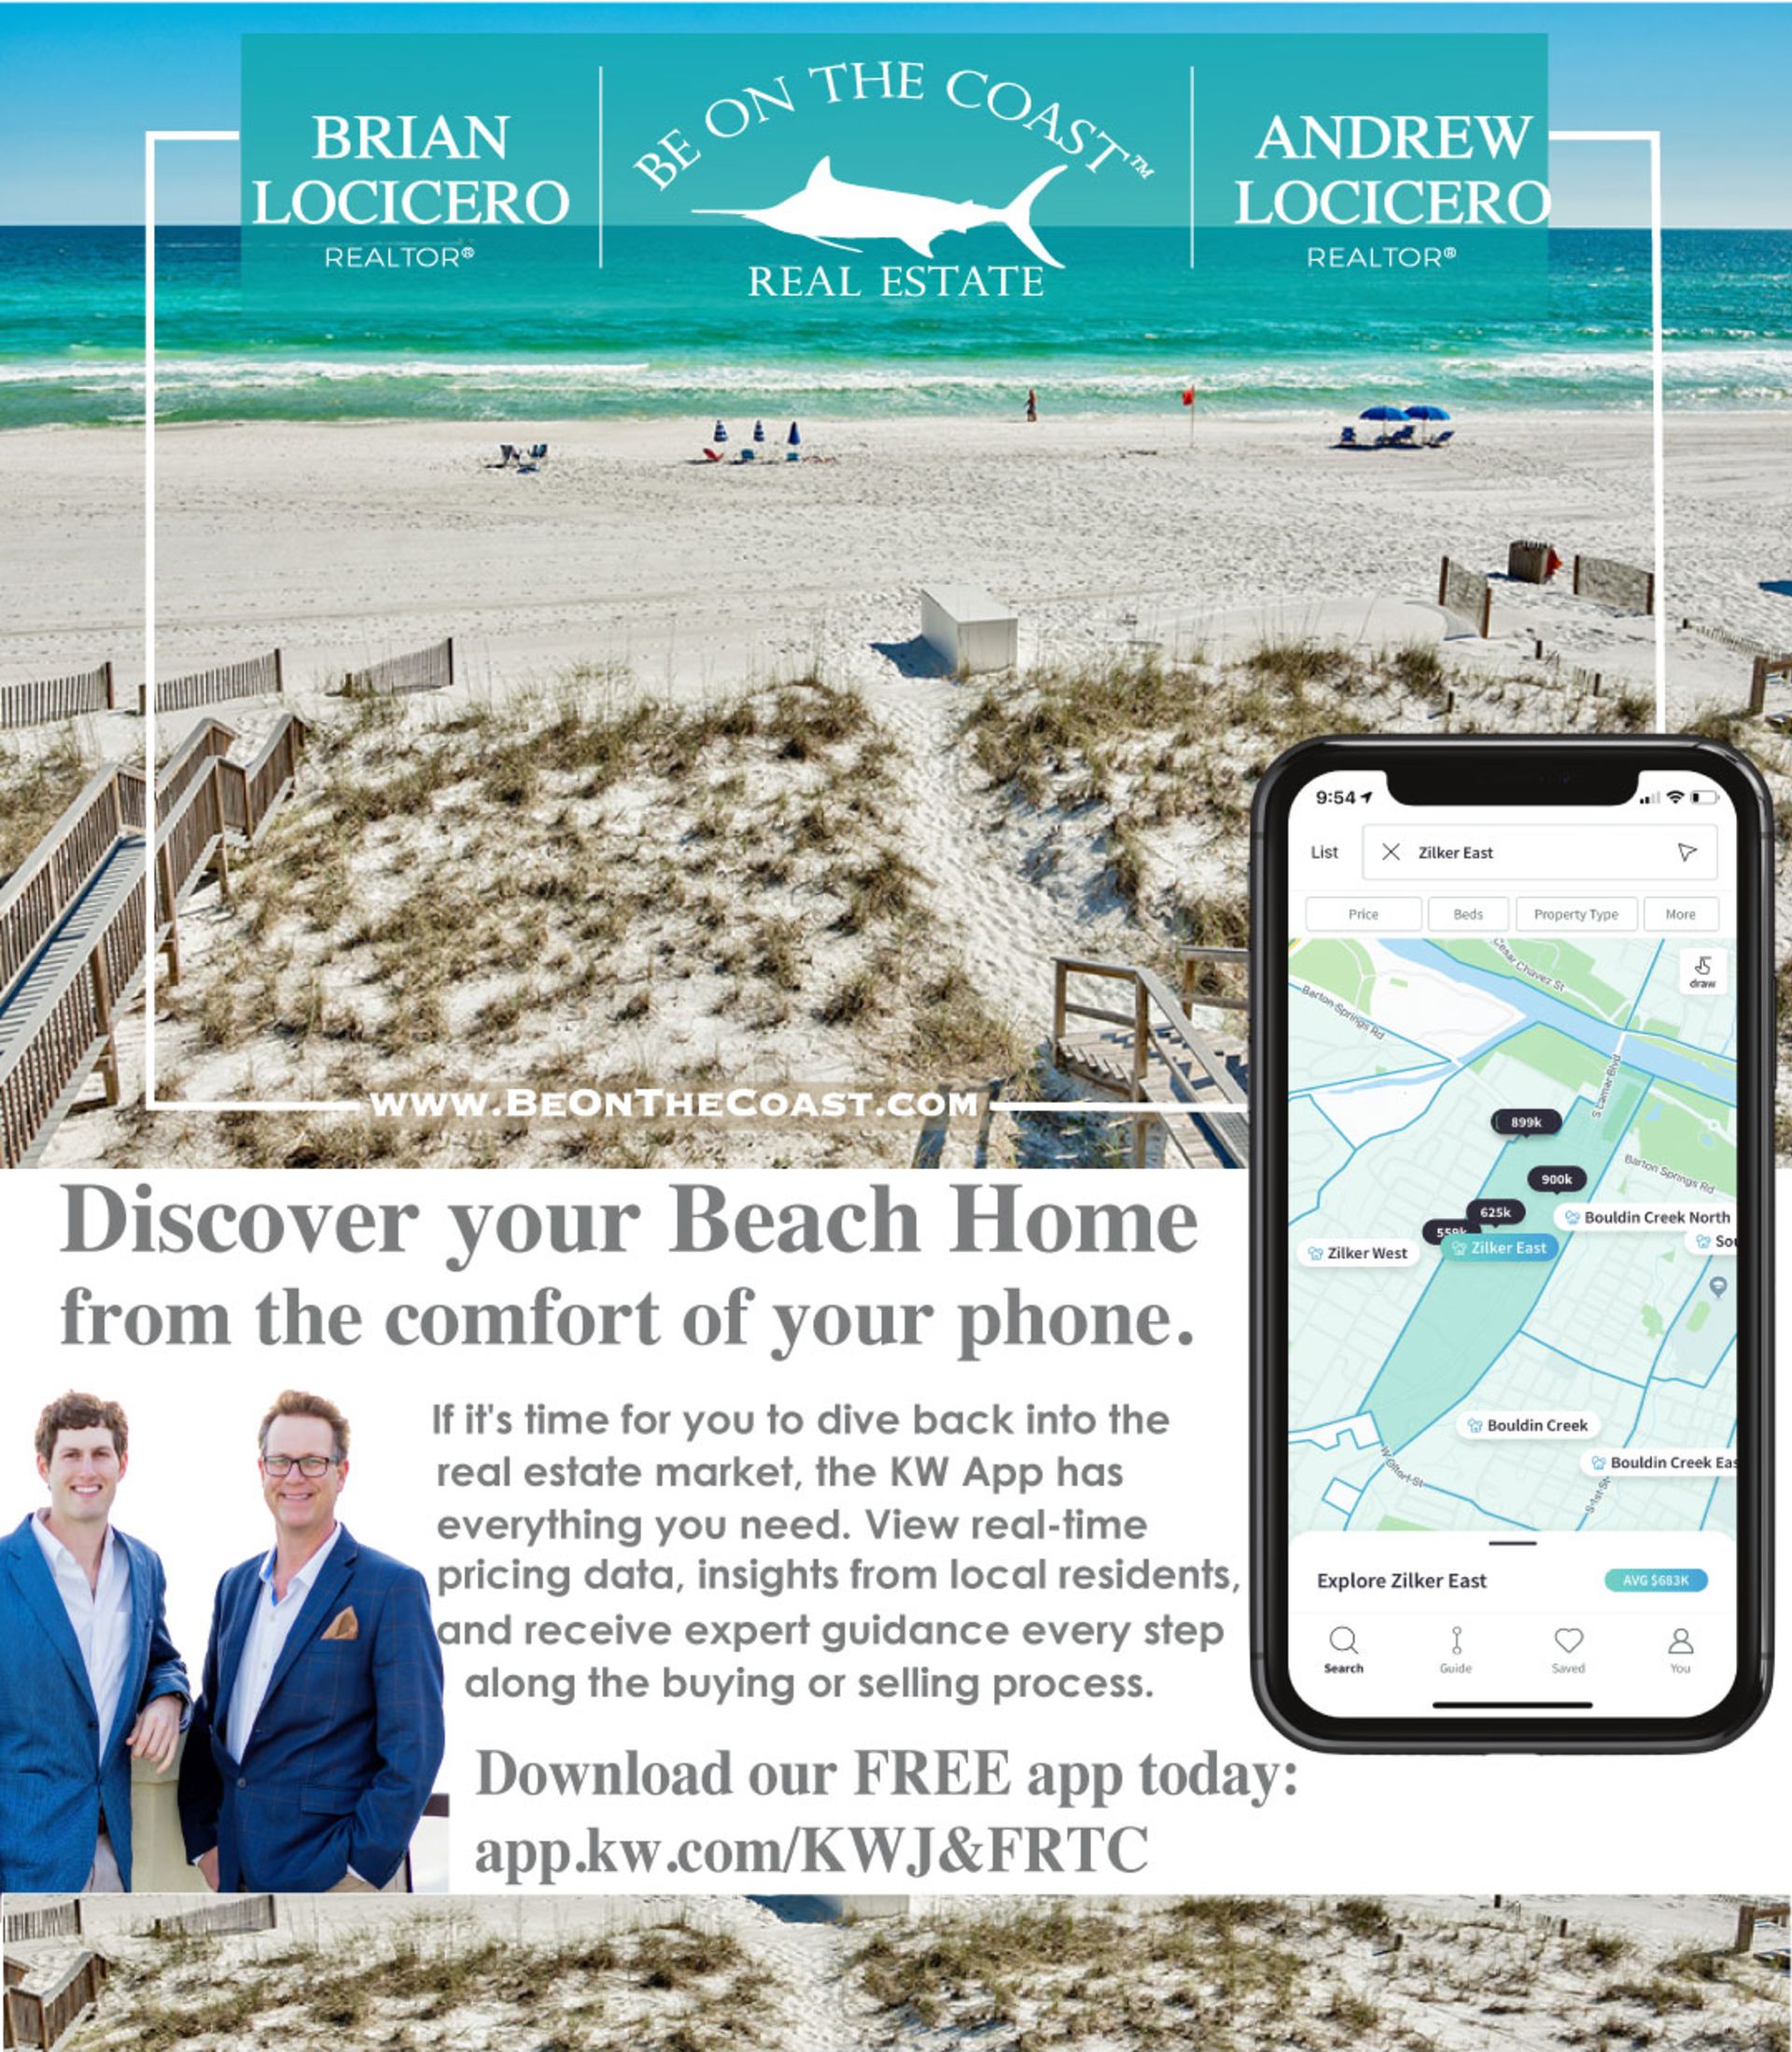 Ready to find Beach Property in your budget? Download our FREE App now!